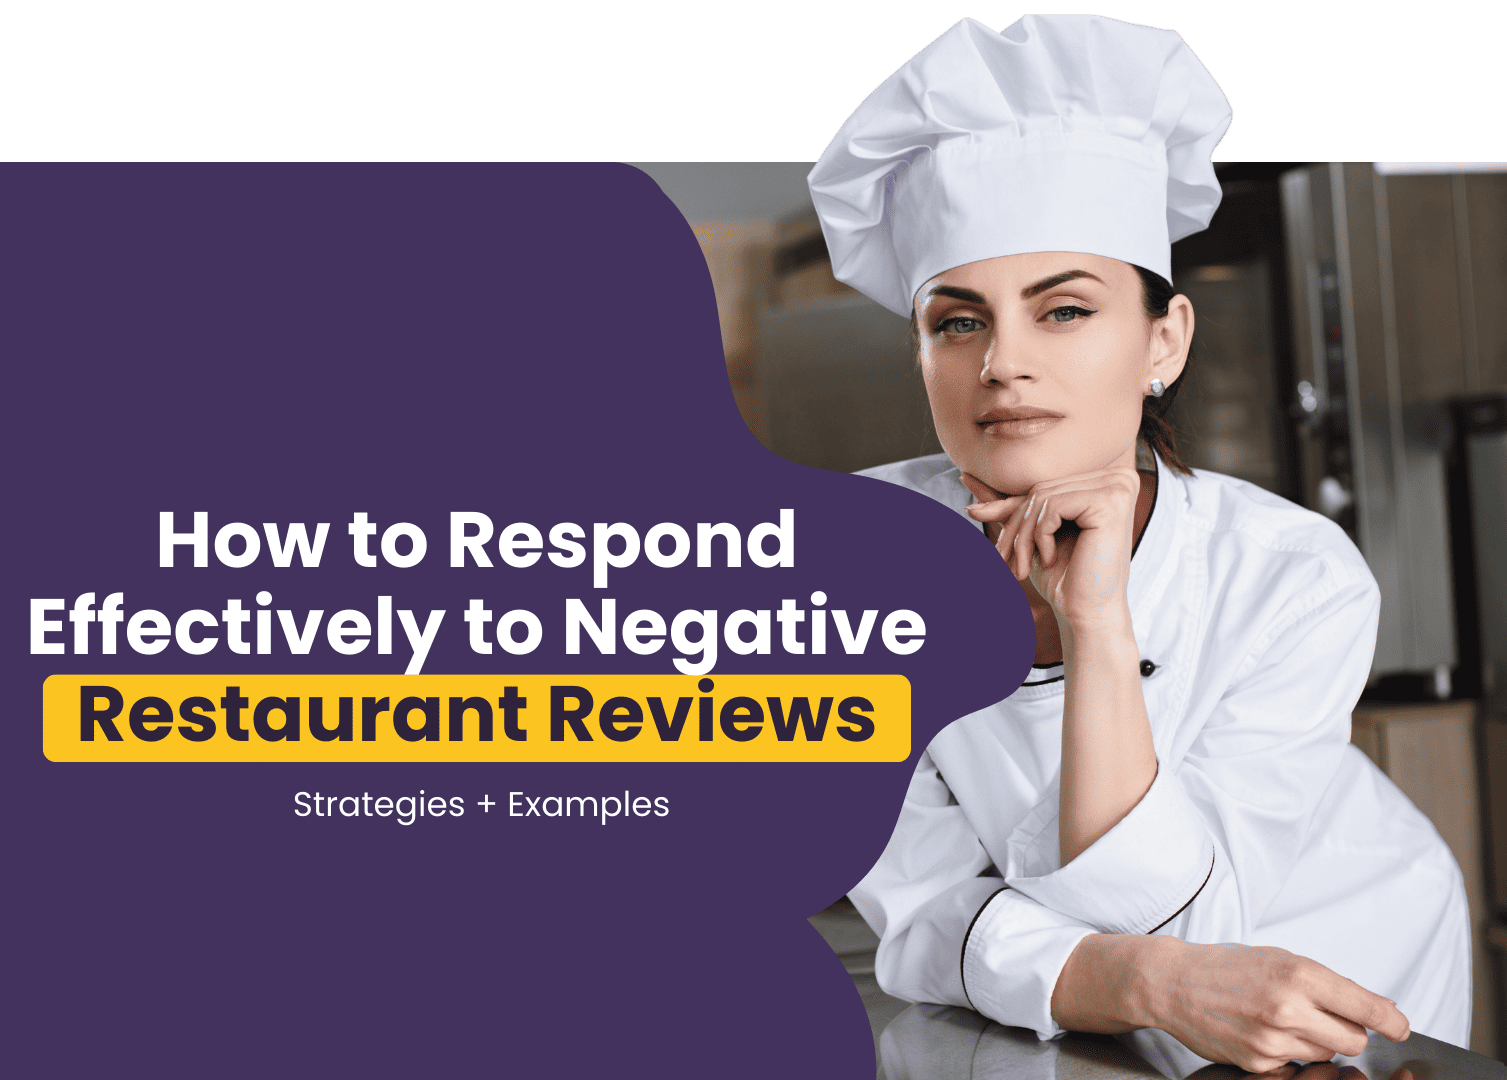 How to Respond Effectively to Negative Restaurant Reviews: Proven Strategies